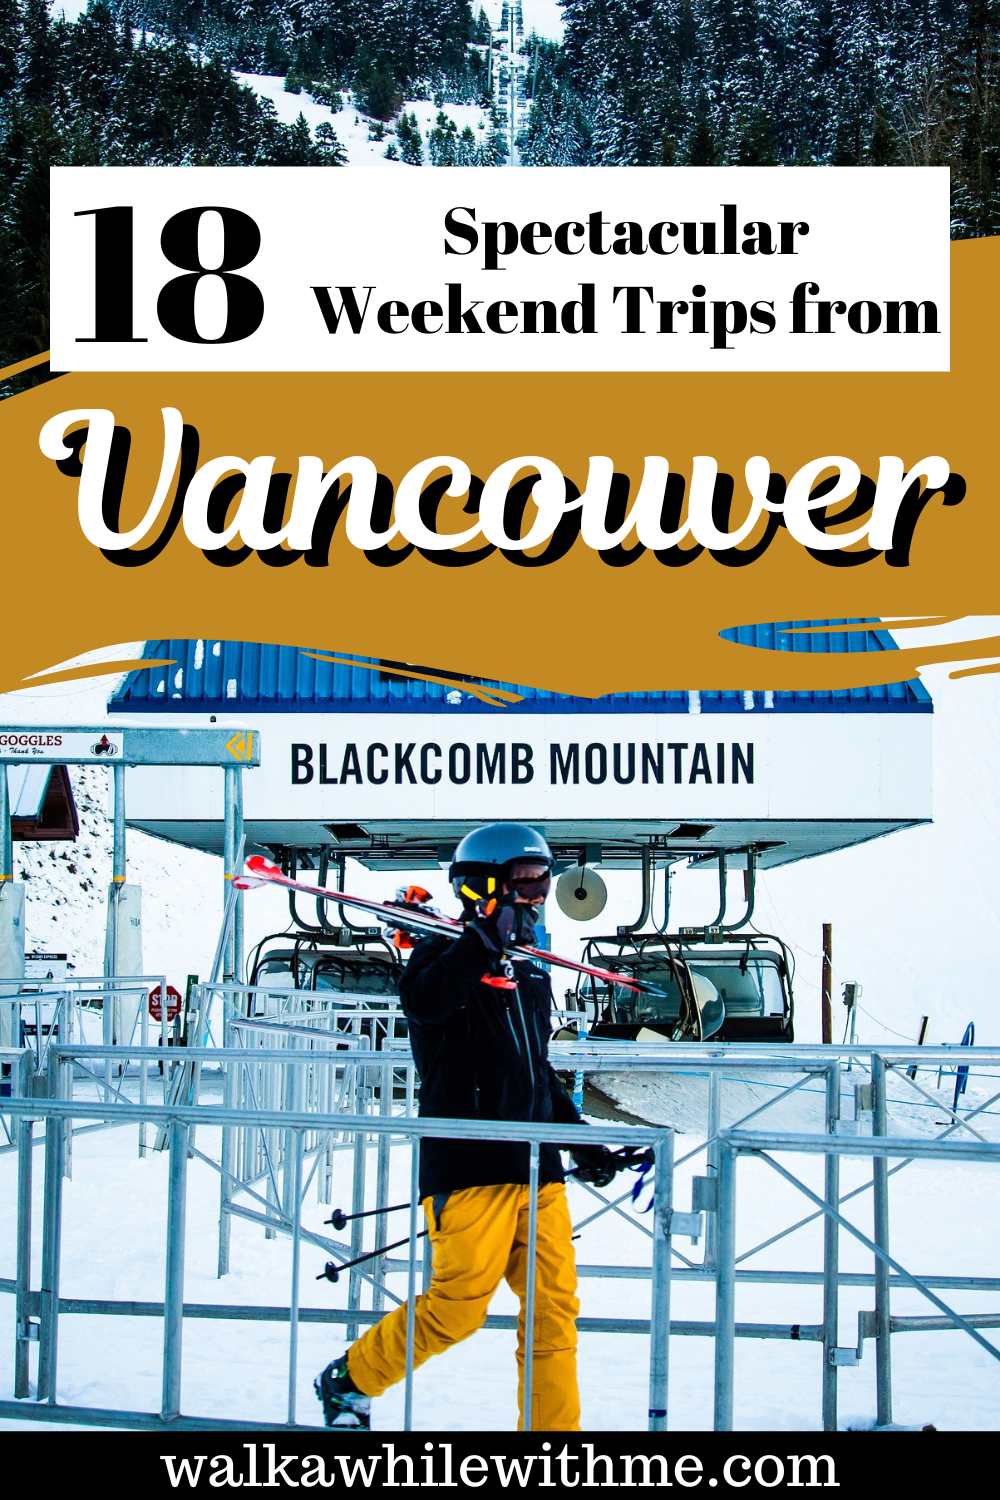 18 Spectacular Weekend Trips from Vancouver